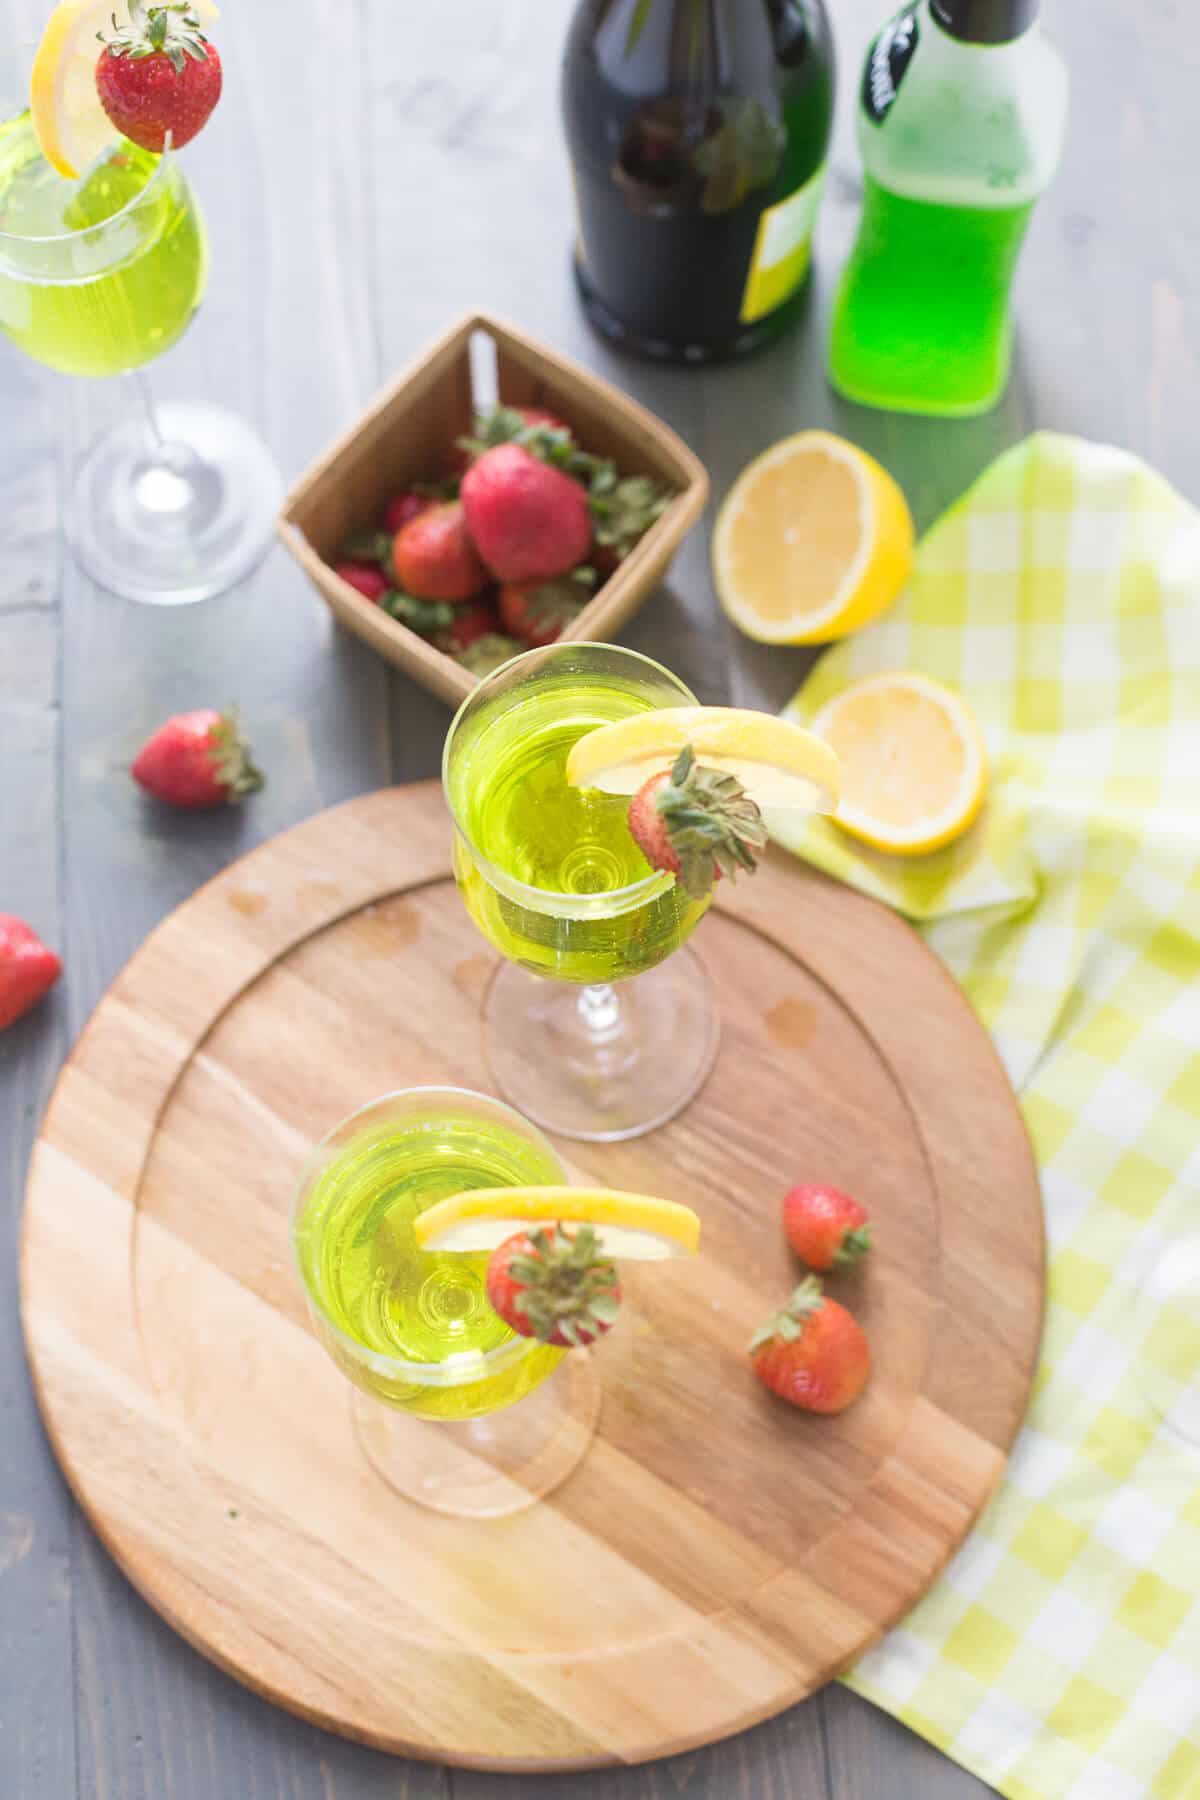 This Irish cocktail is festive and effervescent! Prosecco and Midori are a dynamic duo!